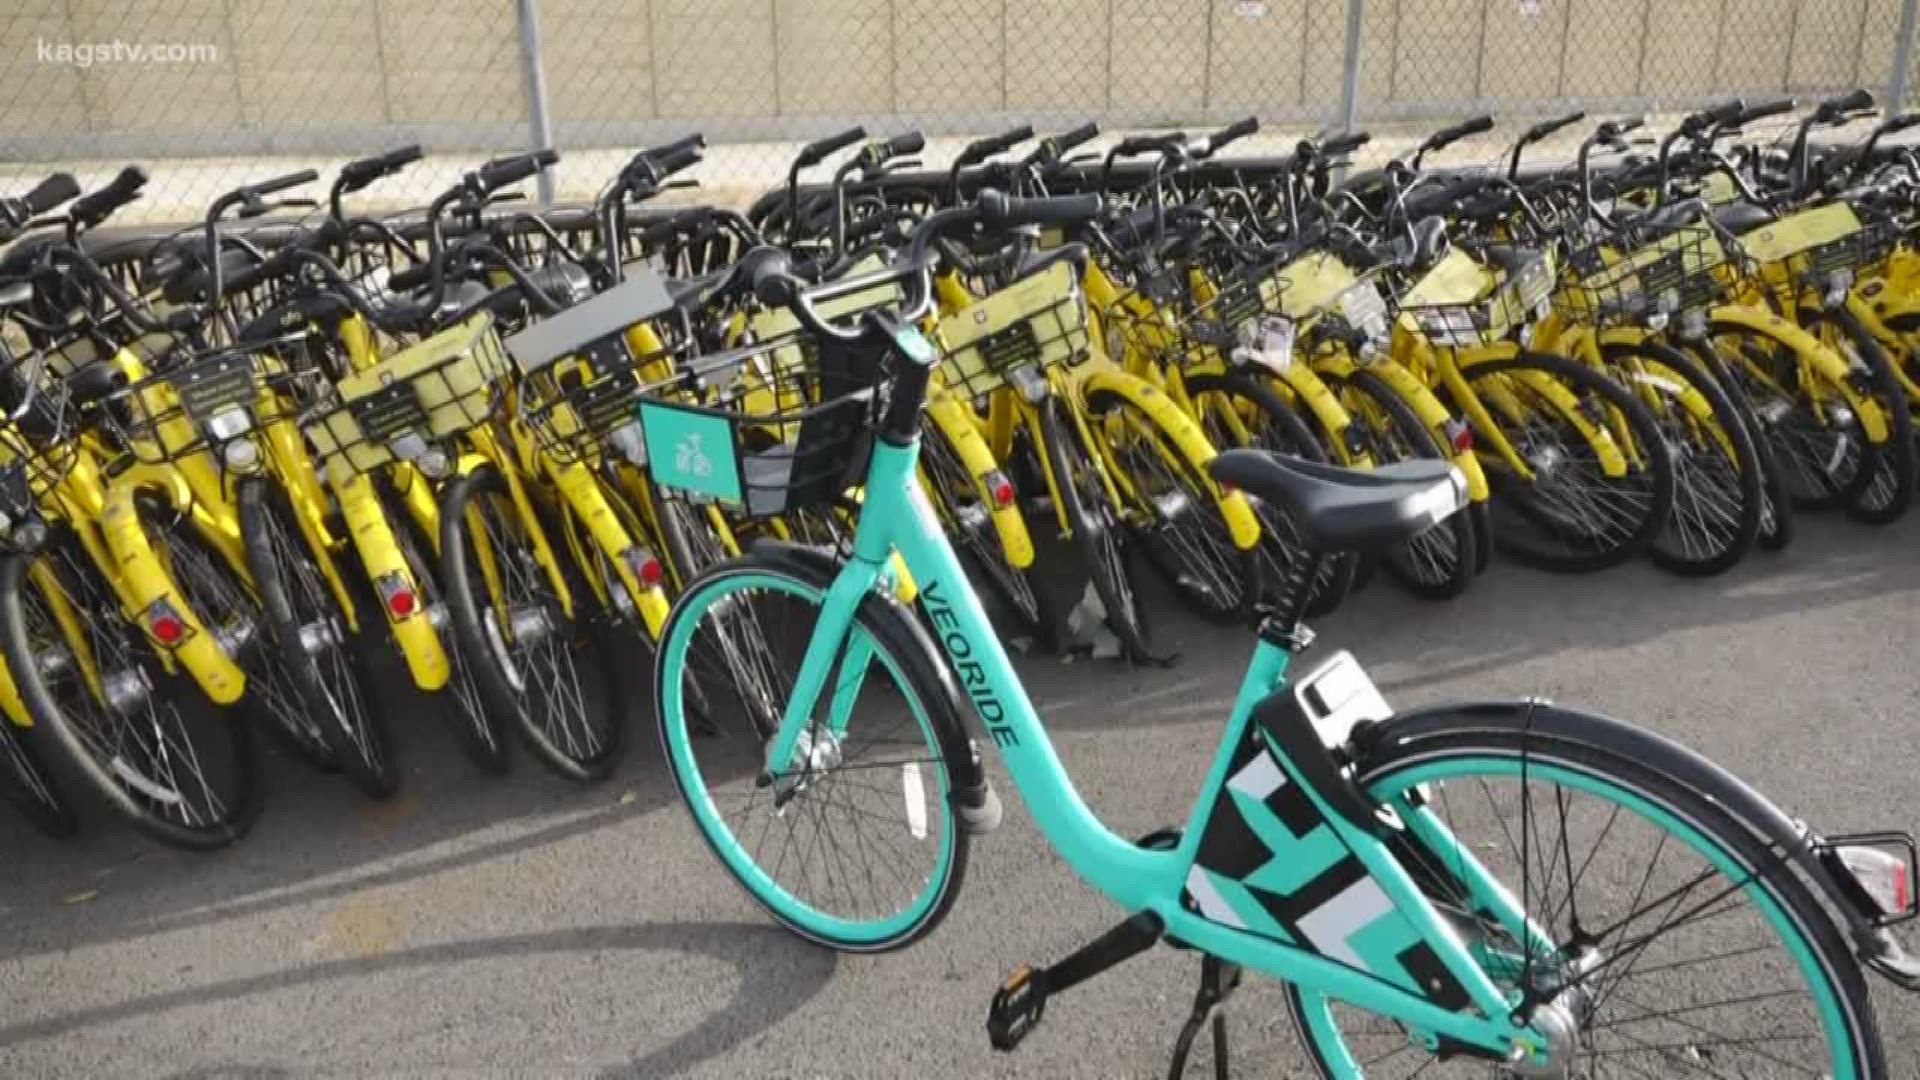 With bike sharing company OFO our at A&M, the school announced Veoride as the new bike share vender staring this spring.